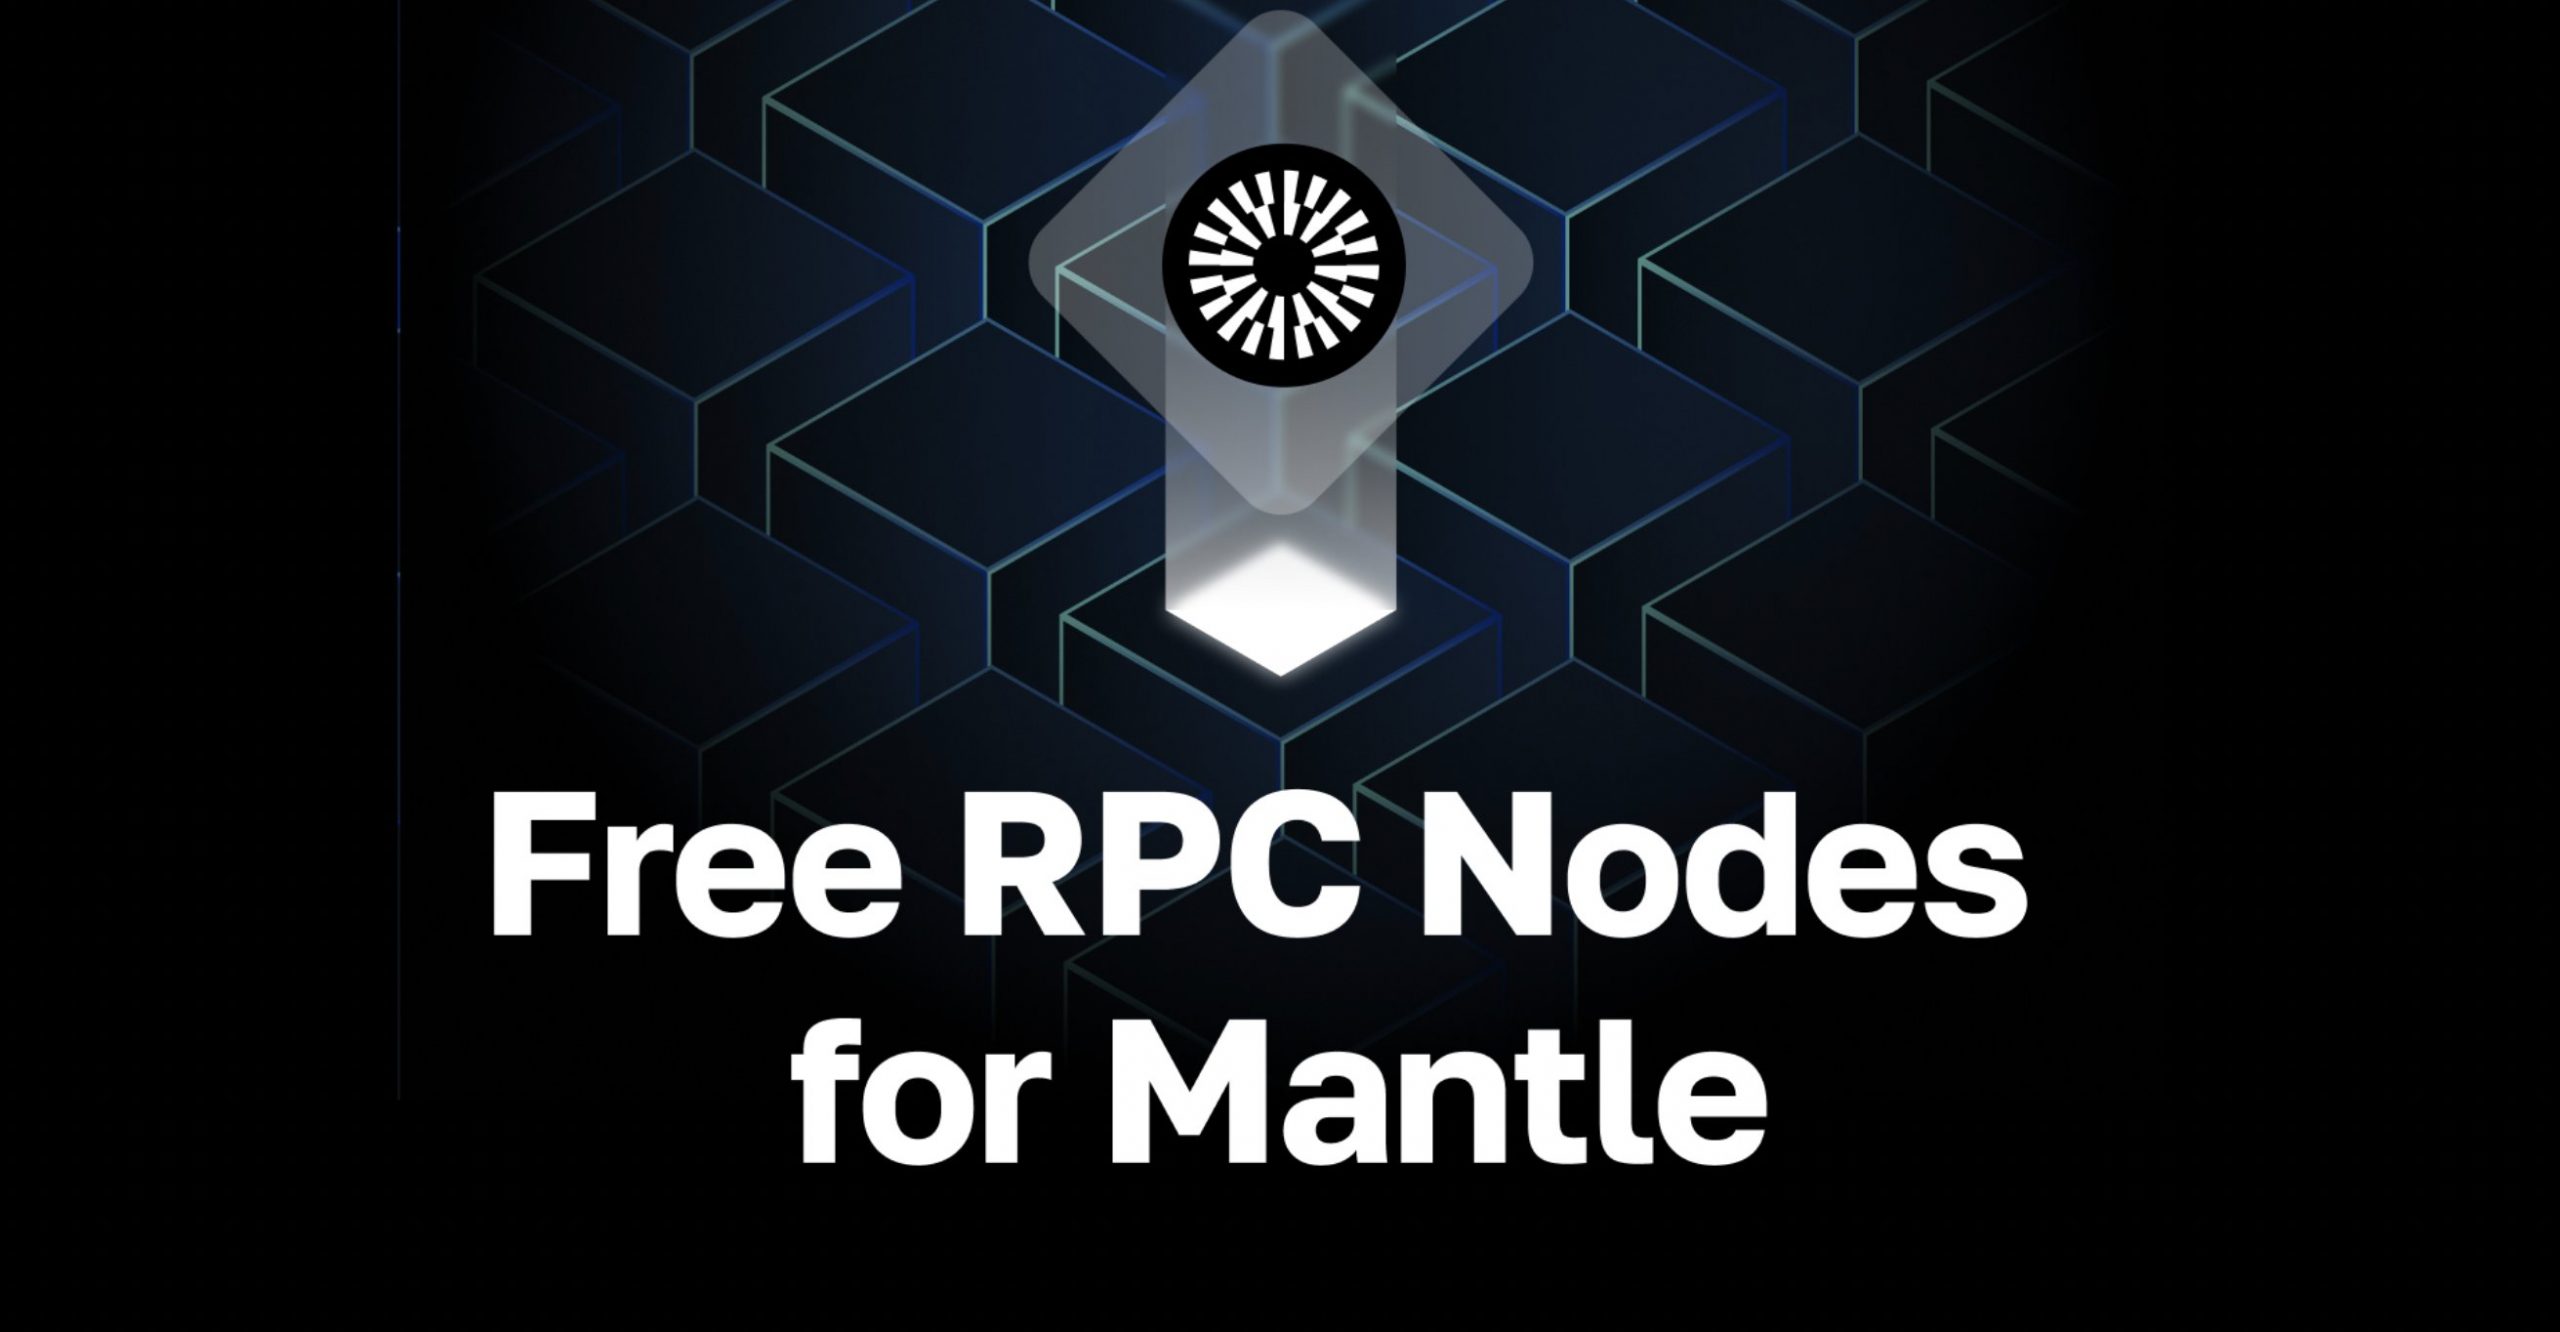 Text: "Free RPC Nodes for Mantle"